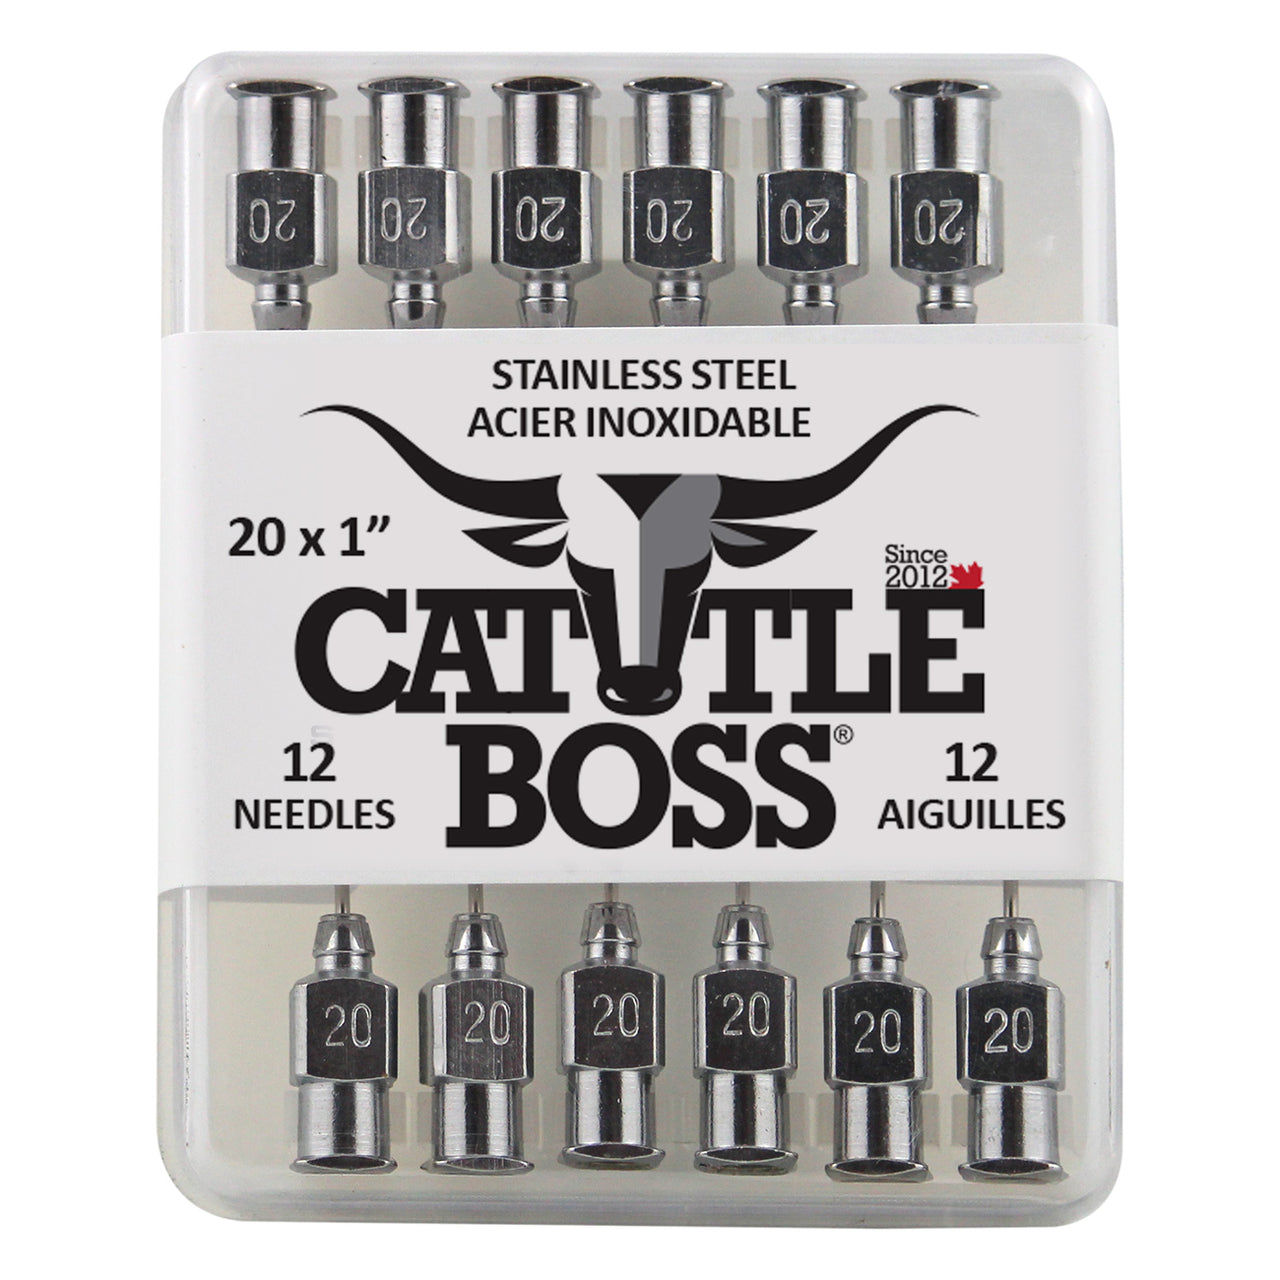 Cattle Boss Stainless Steel Hub Needle (12 Pack) 20X1 - Drug Administration Cattle Boss - Canada